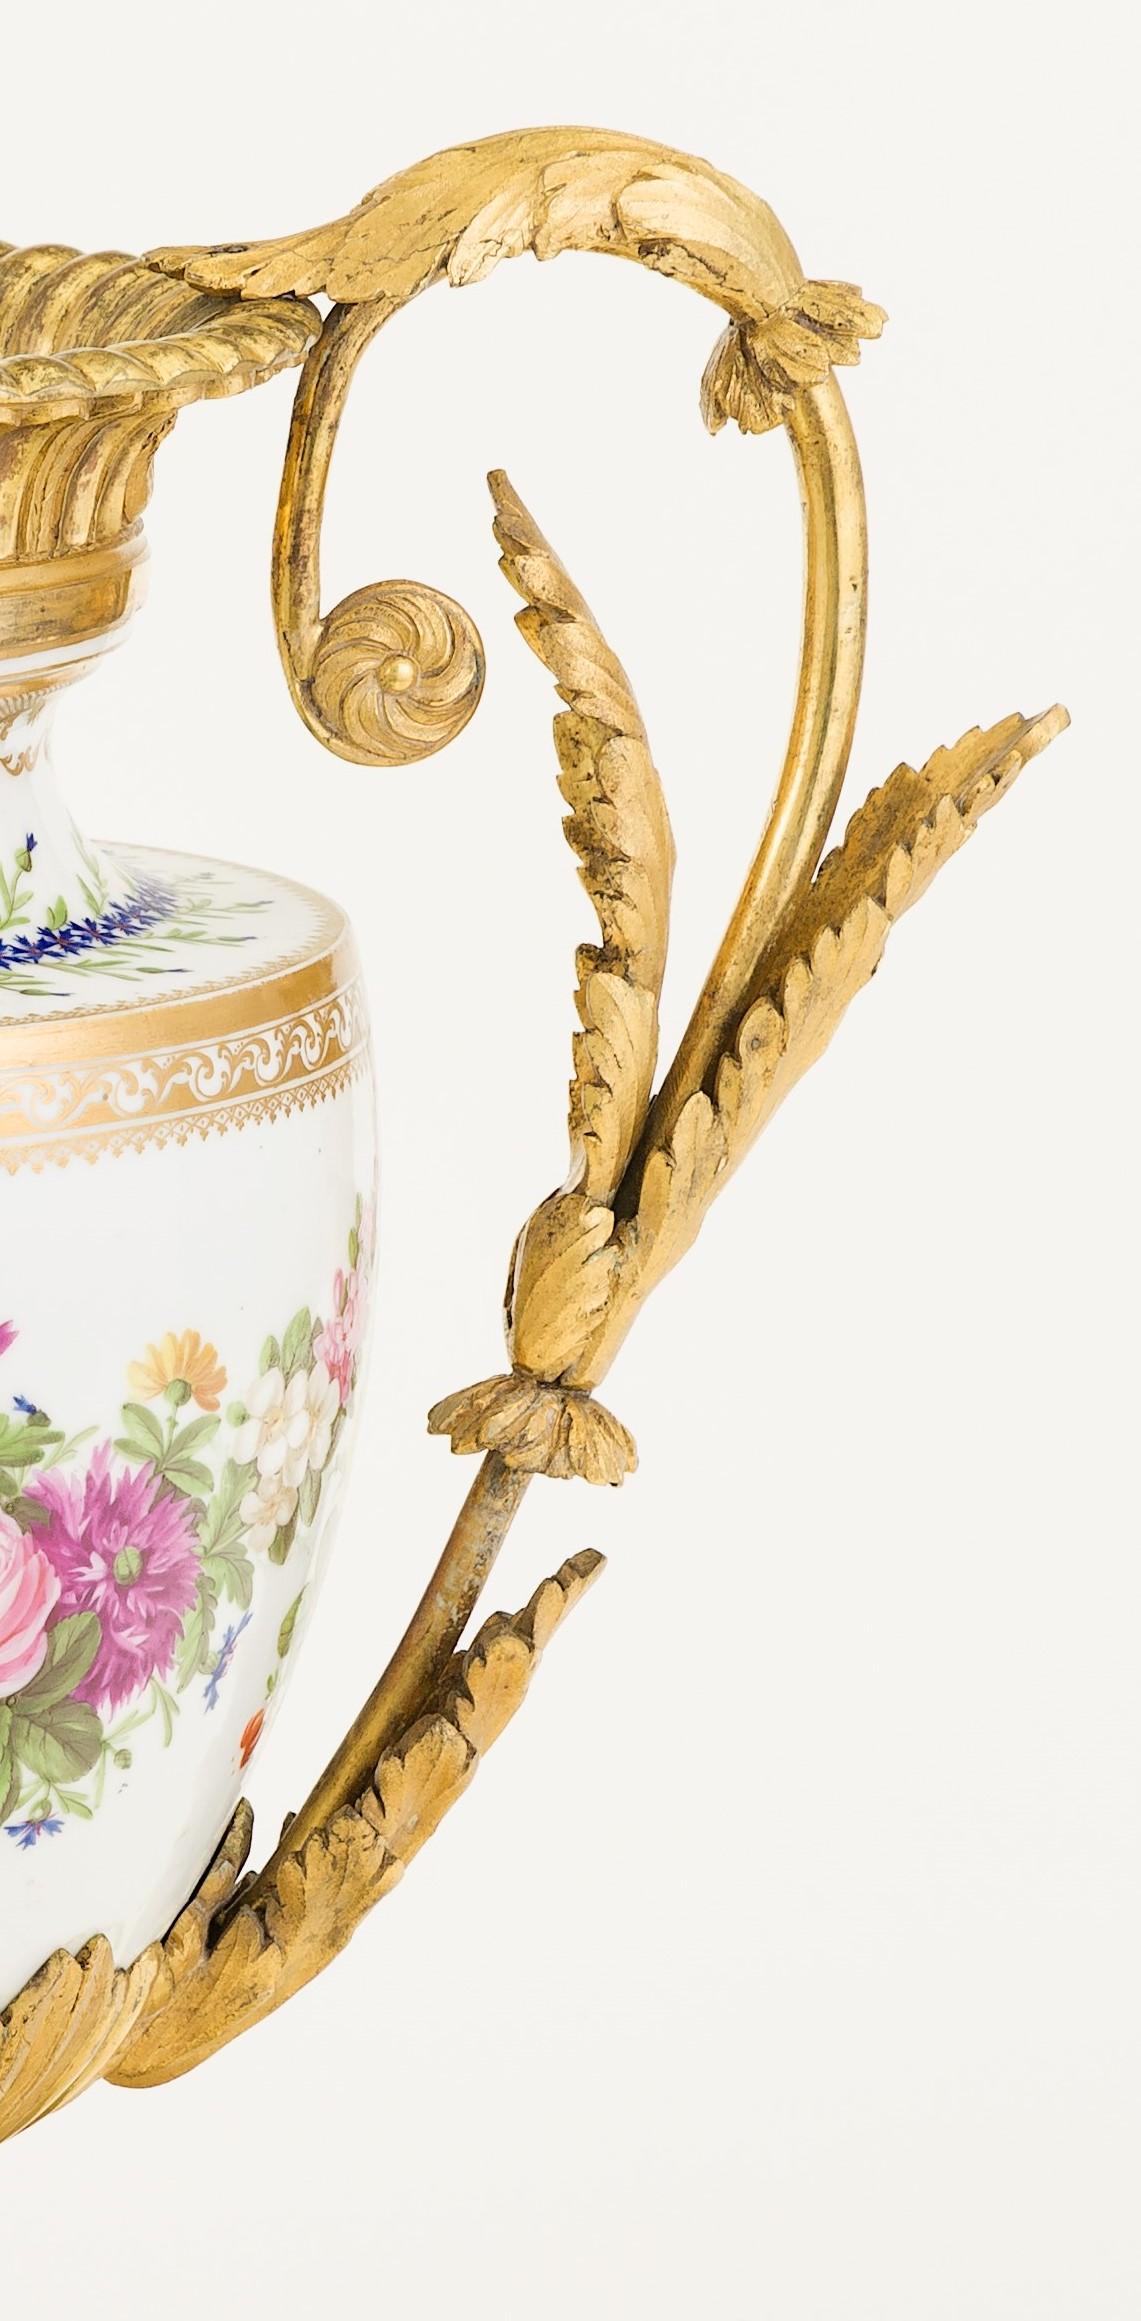 Neoclassical 18th Century French Hand Painted Porcelain in Gilt-Mount 'Ormolu', Centrepiece For Sale